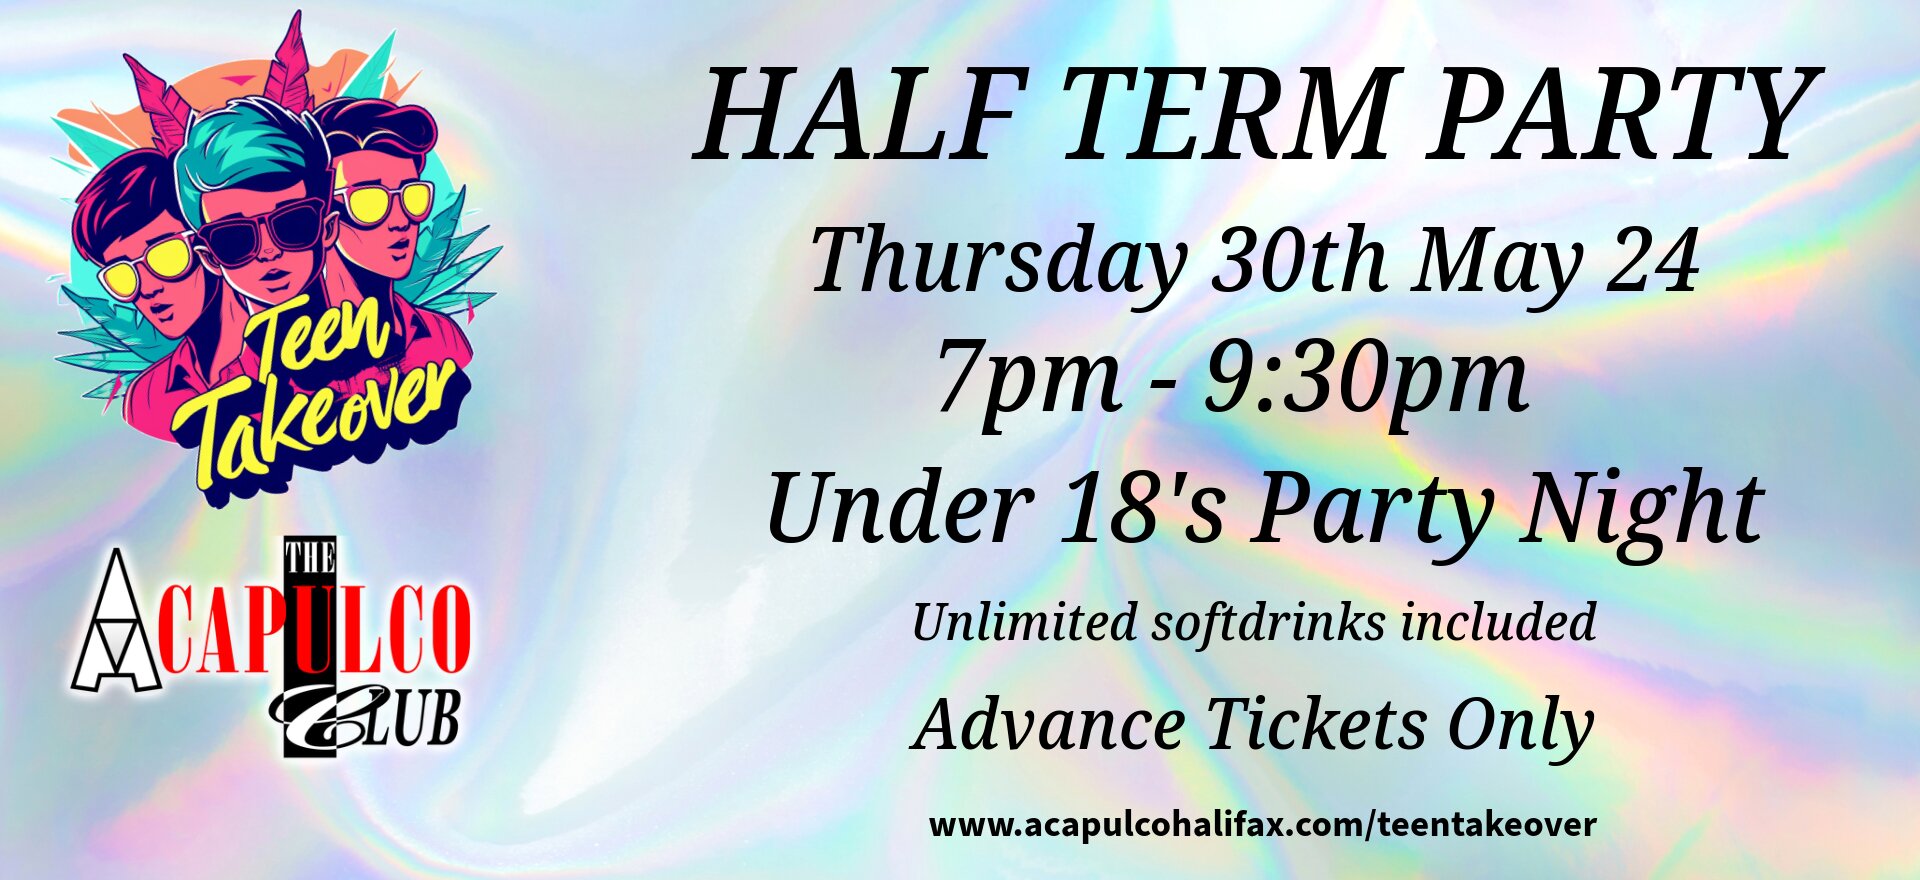 Half Term Party | Under 18s Only Thursday 30th May